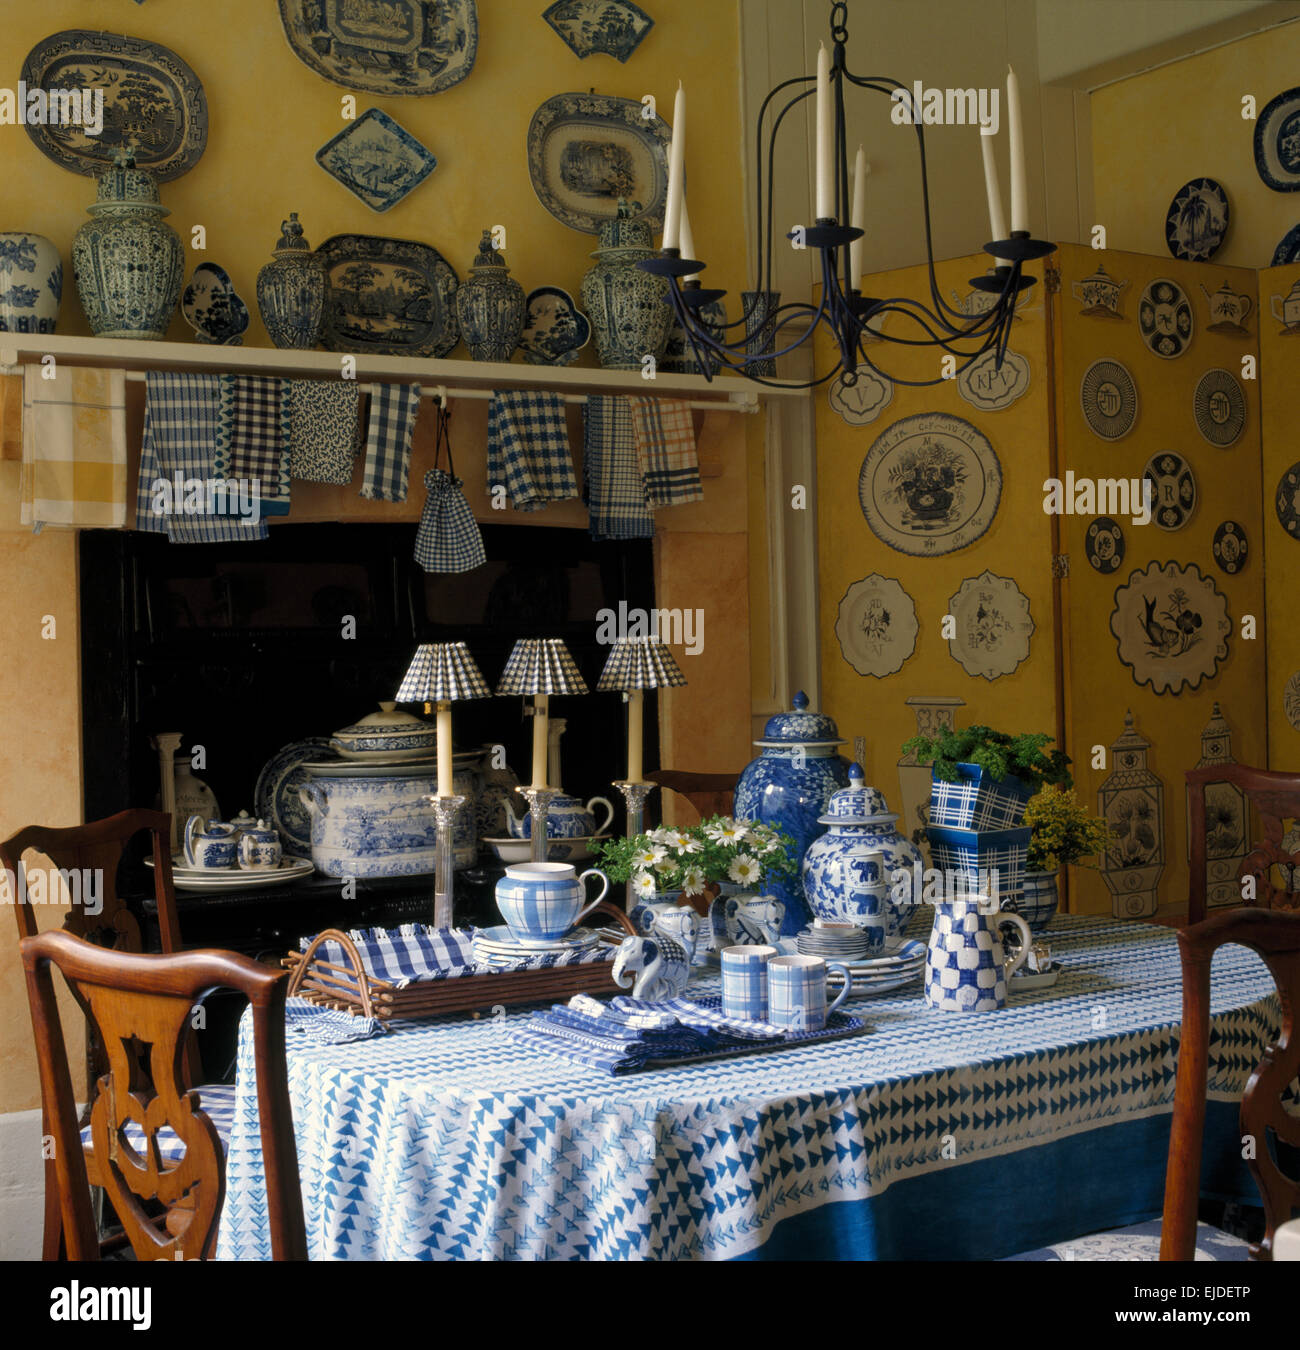 Collection of blue+white china on shelf in yellow nineties kitchen with blue patterned cloth on dining table Stock Photo